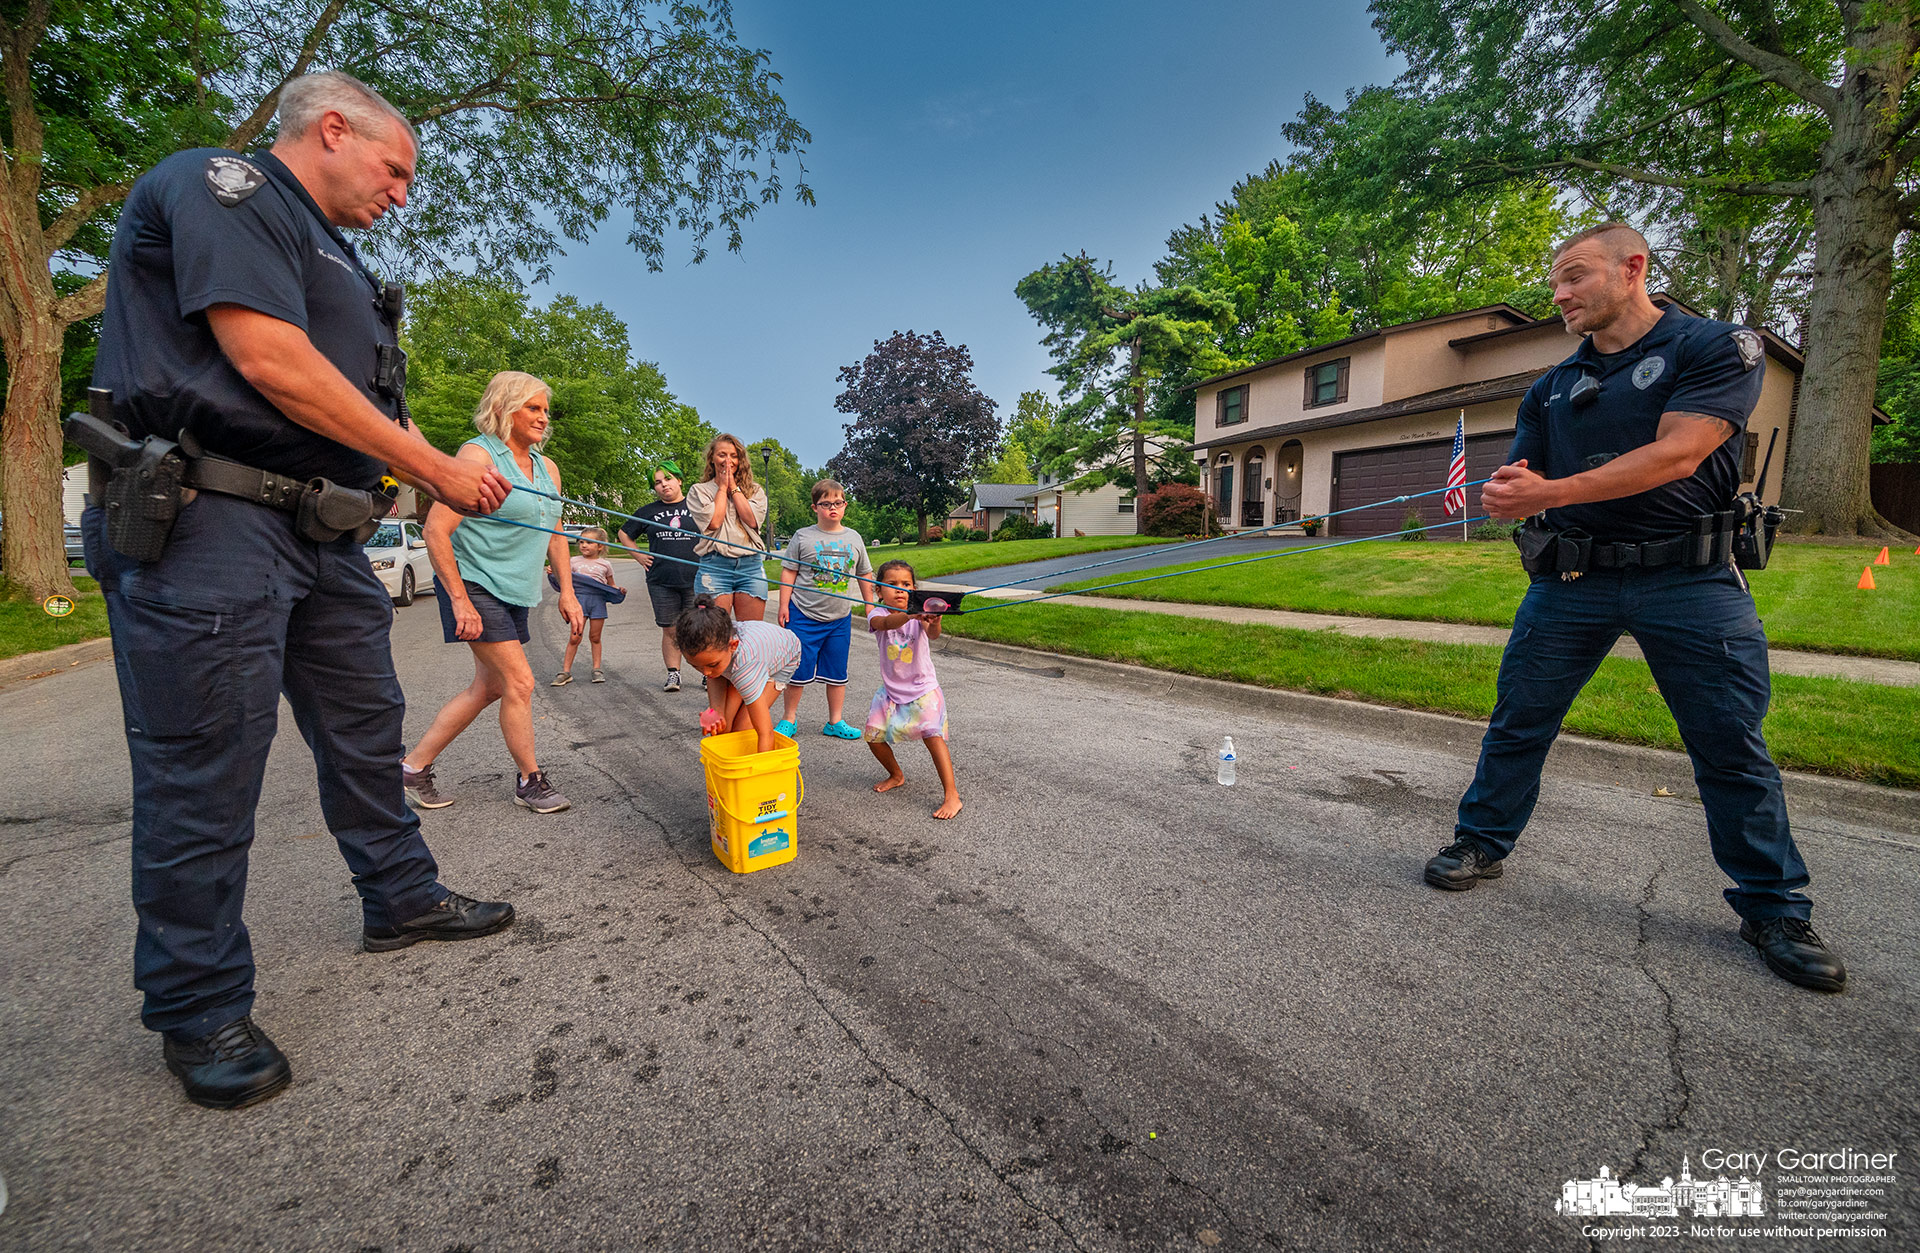 Westerville police officers assist a group of kids using a water balloon slingshot against other kids and a few adults at National Night Out. My Final Photo for August 1, 2023.